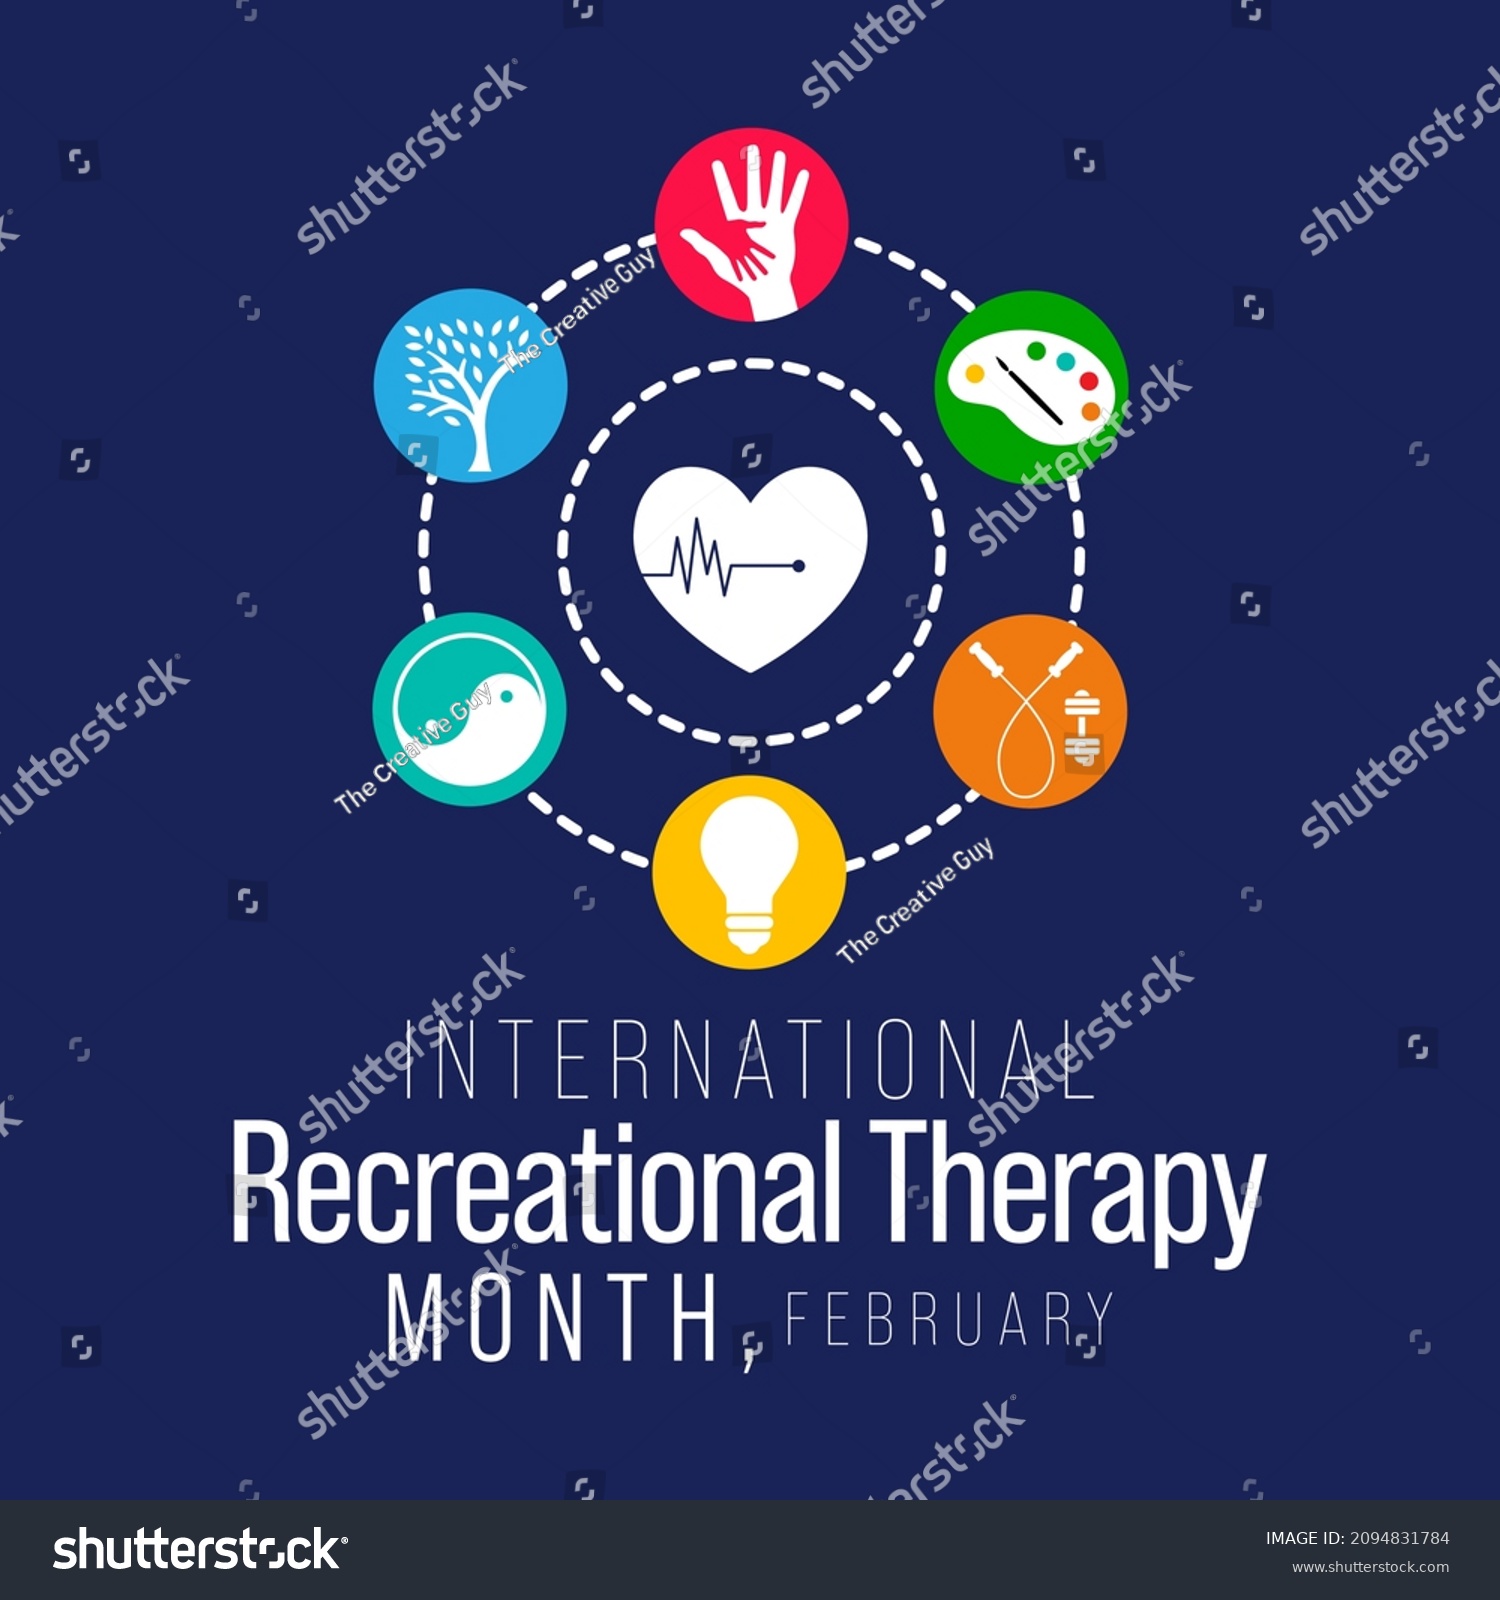 Therapeutic Recreation (TR) month is observed every year in February, Vector illustration #2094831784